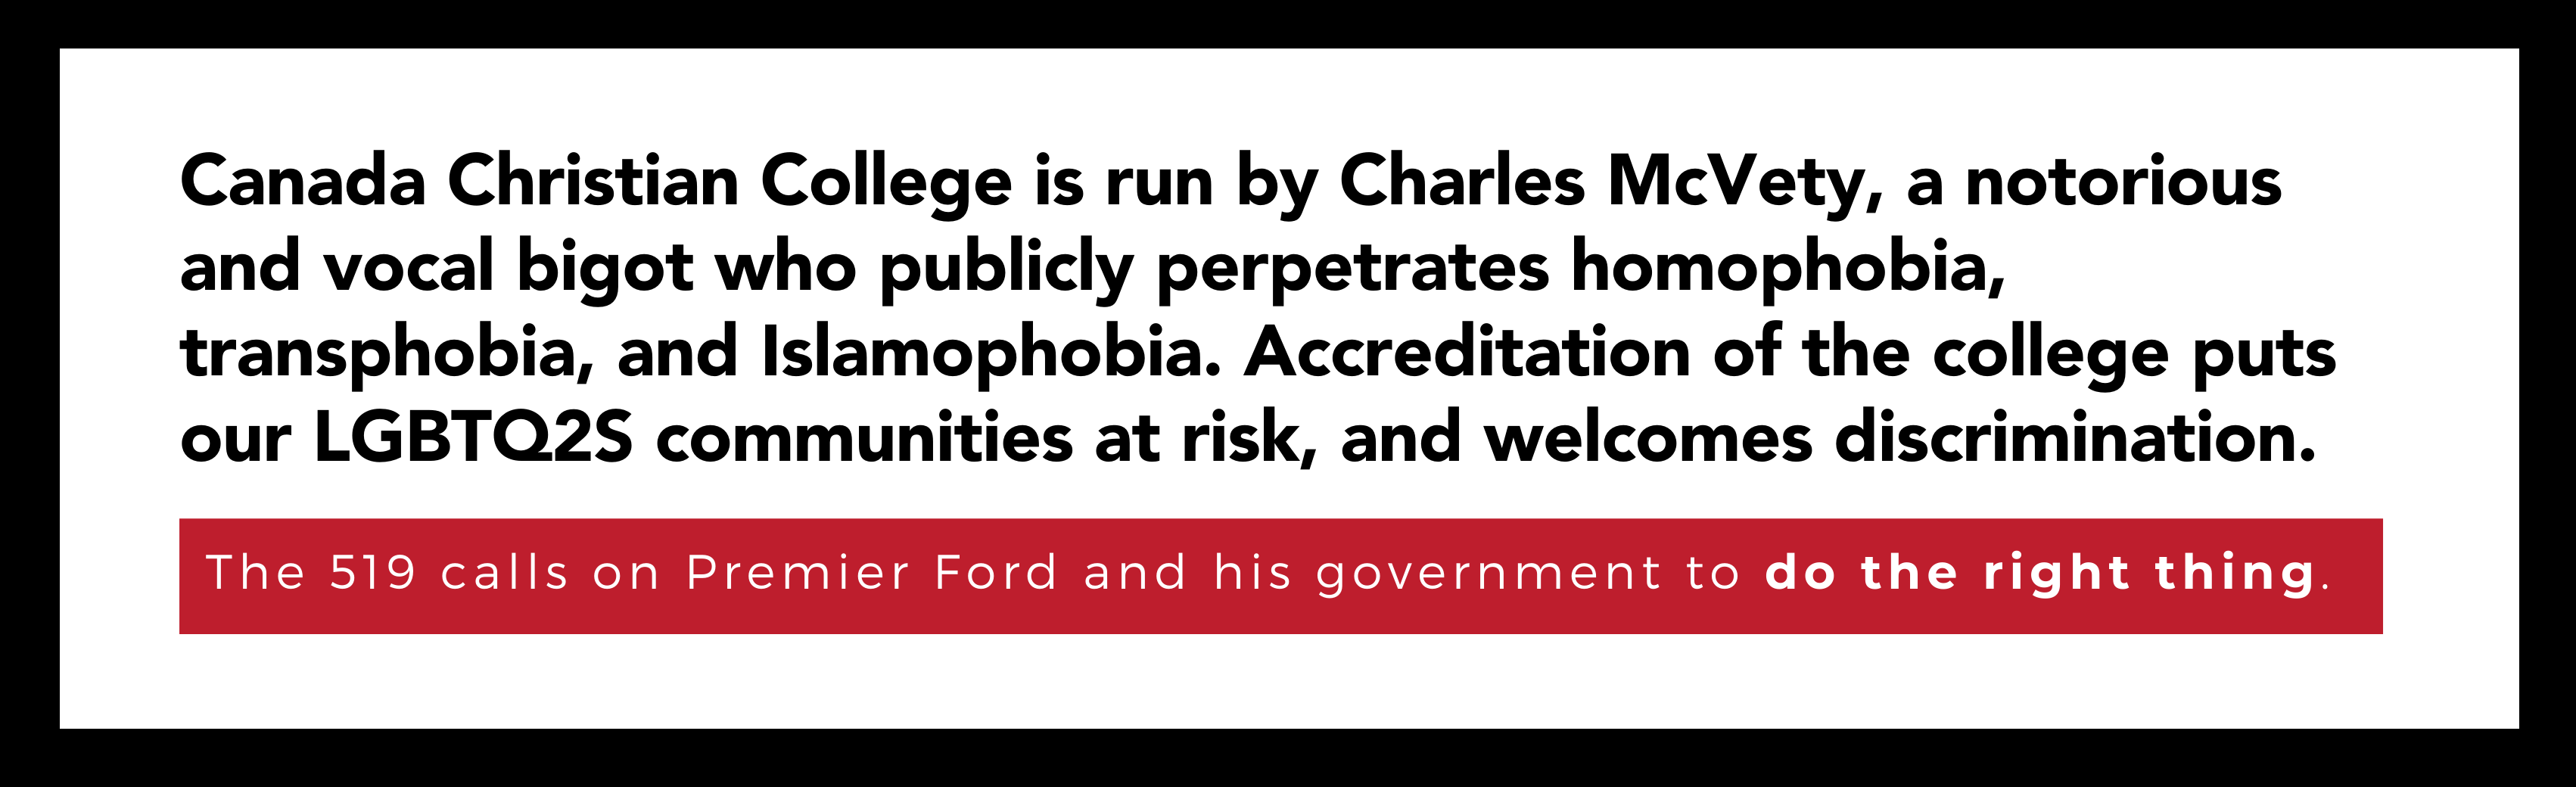 The accreditation of Canada Christian College puts our LGBTQ2S communities at risk